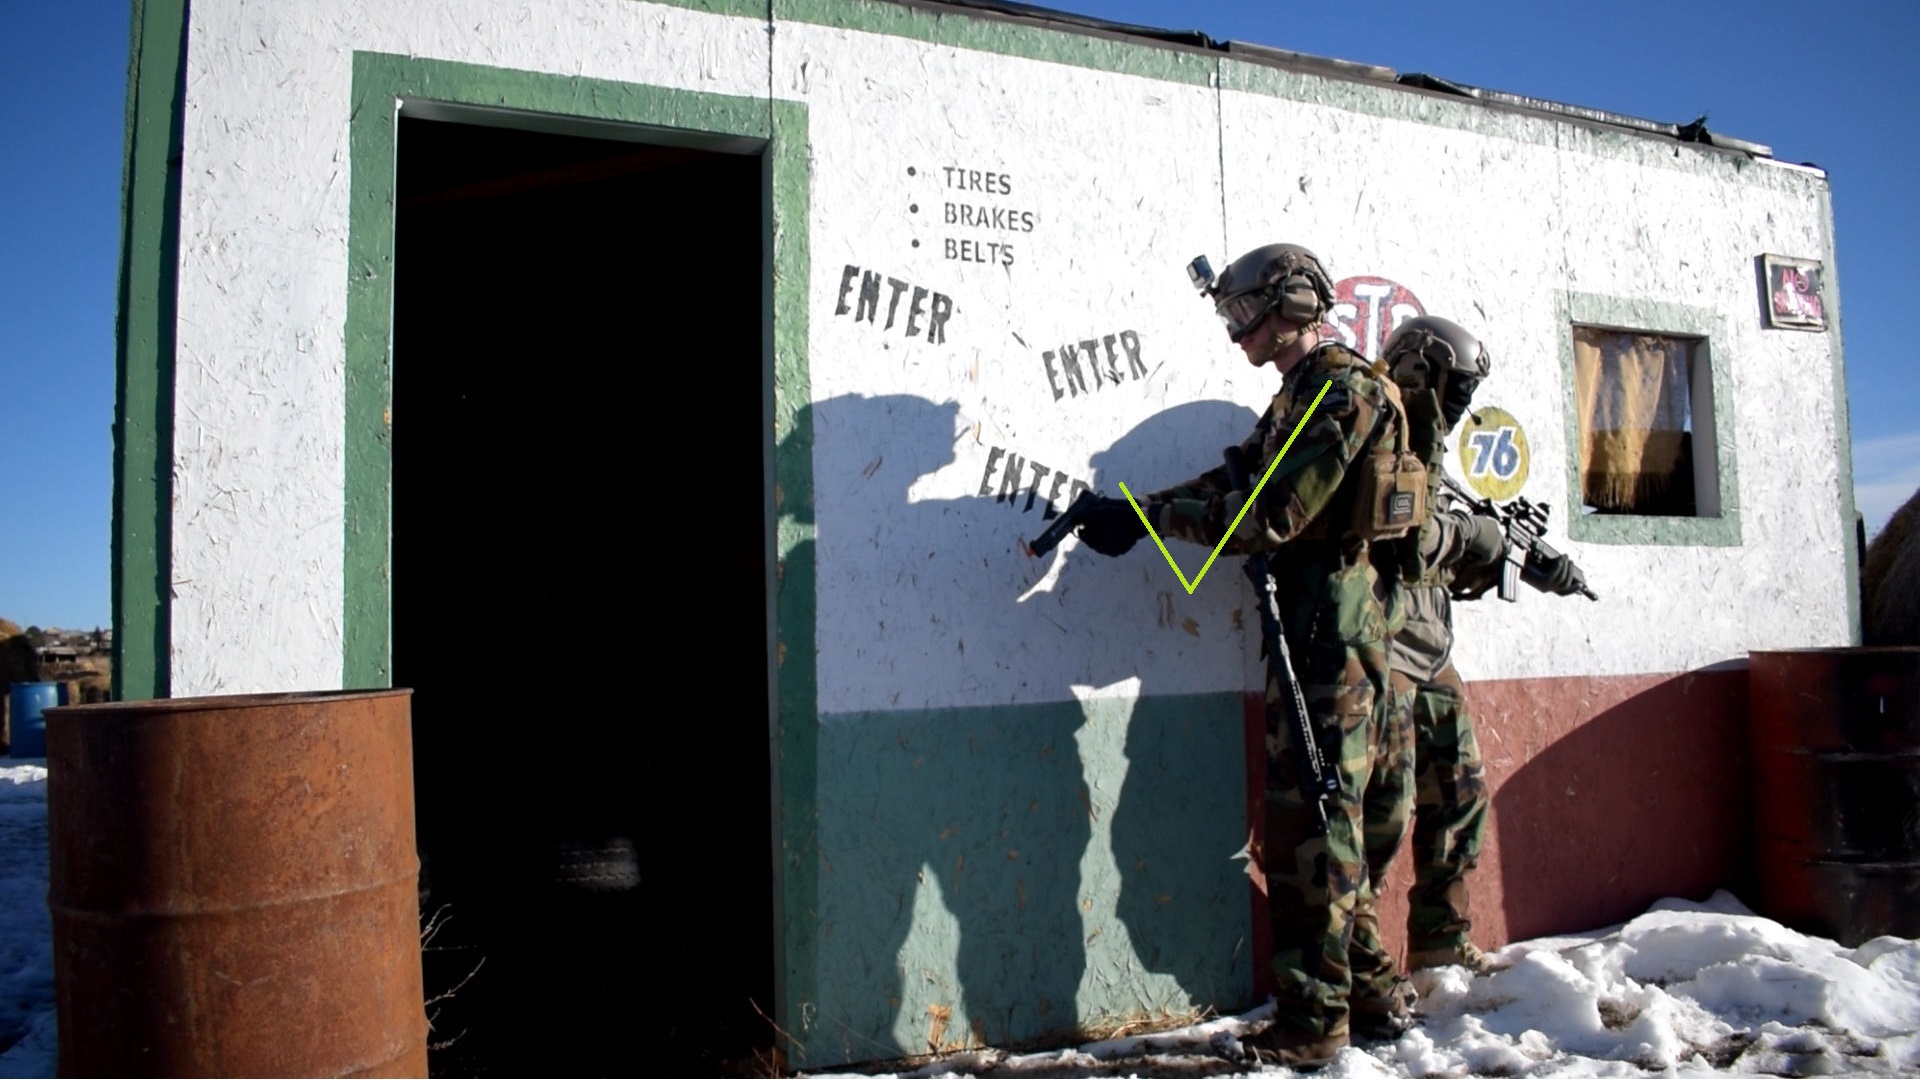 Two airsoft players in camouflage standing by a building with one player signaling to another, with a green check mark indicating correct action or communication.